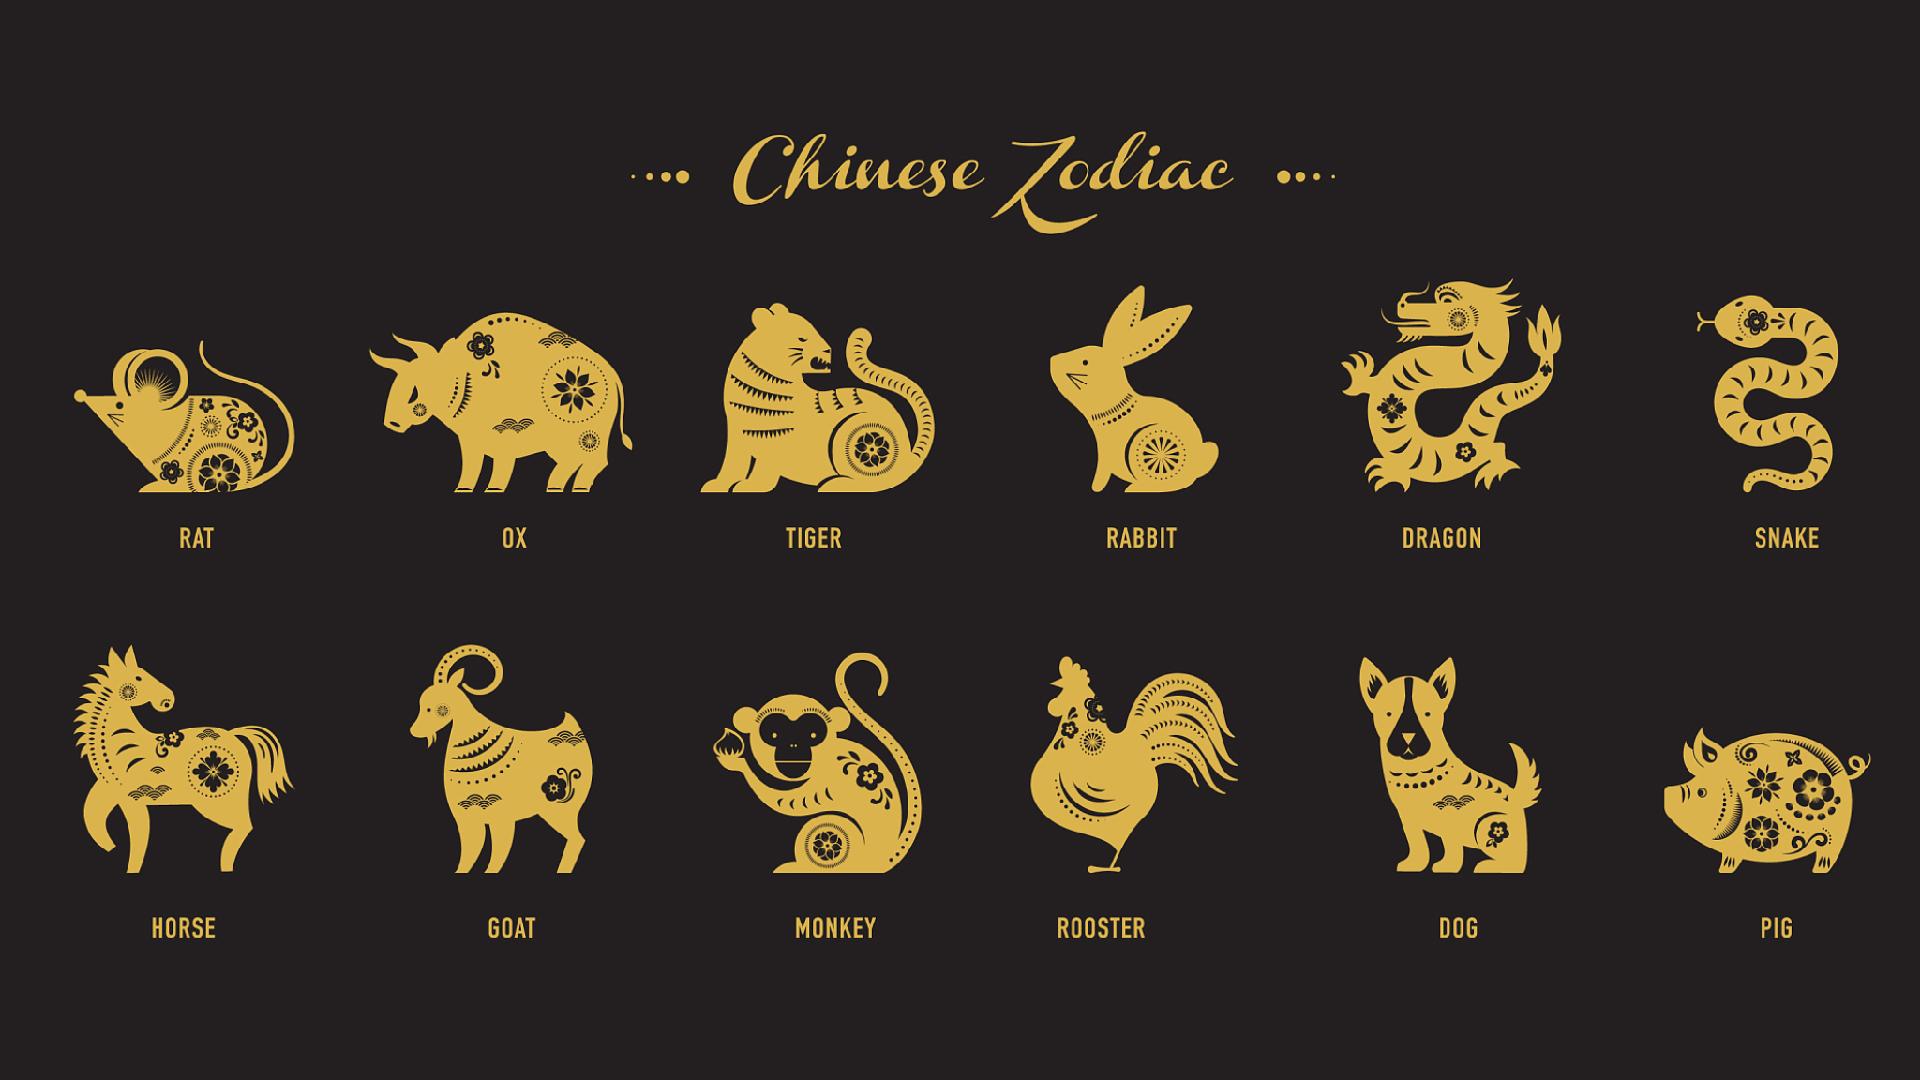 Travelogue: The legend of the Chinese zodiac - CGTN